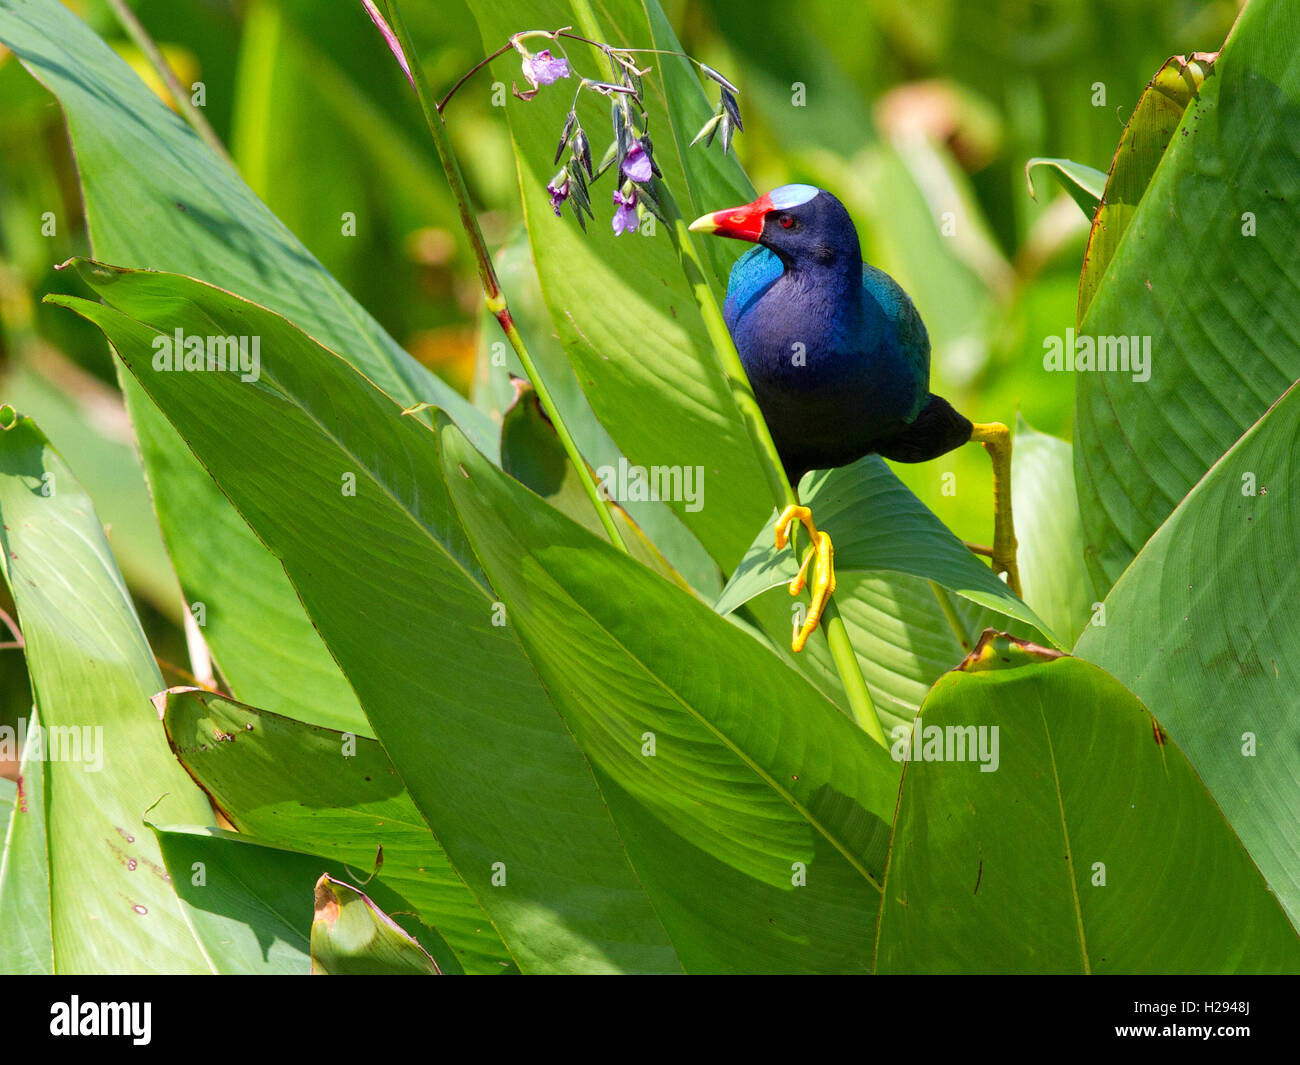 A purple gallinule,Porphyrio martinicus, nibbles on a favorite treat - flowers of the aquatic Fire Flag or Alligator flag plant. Stock Photo